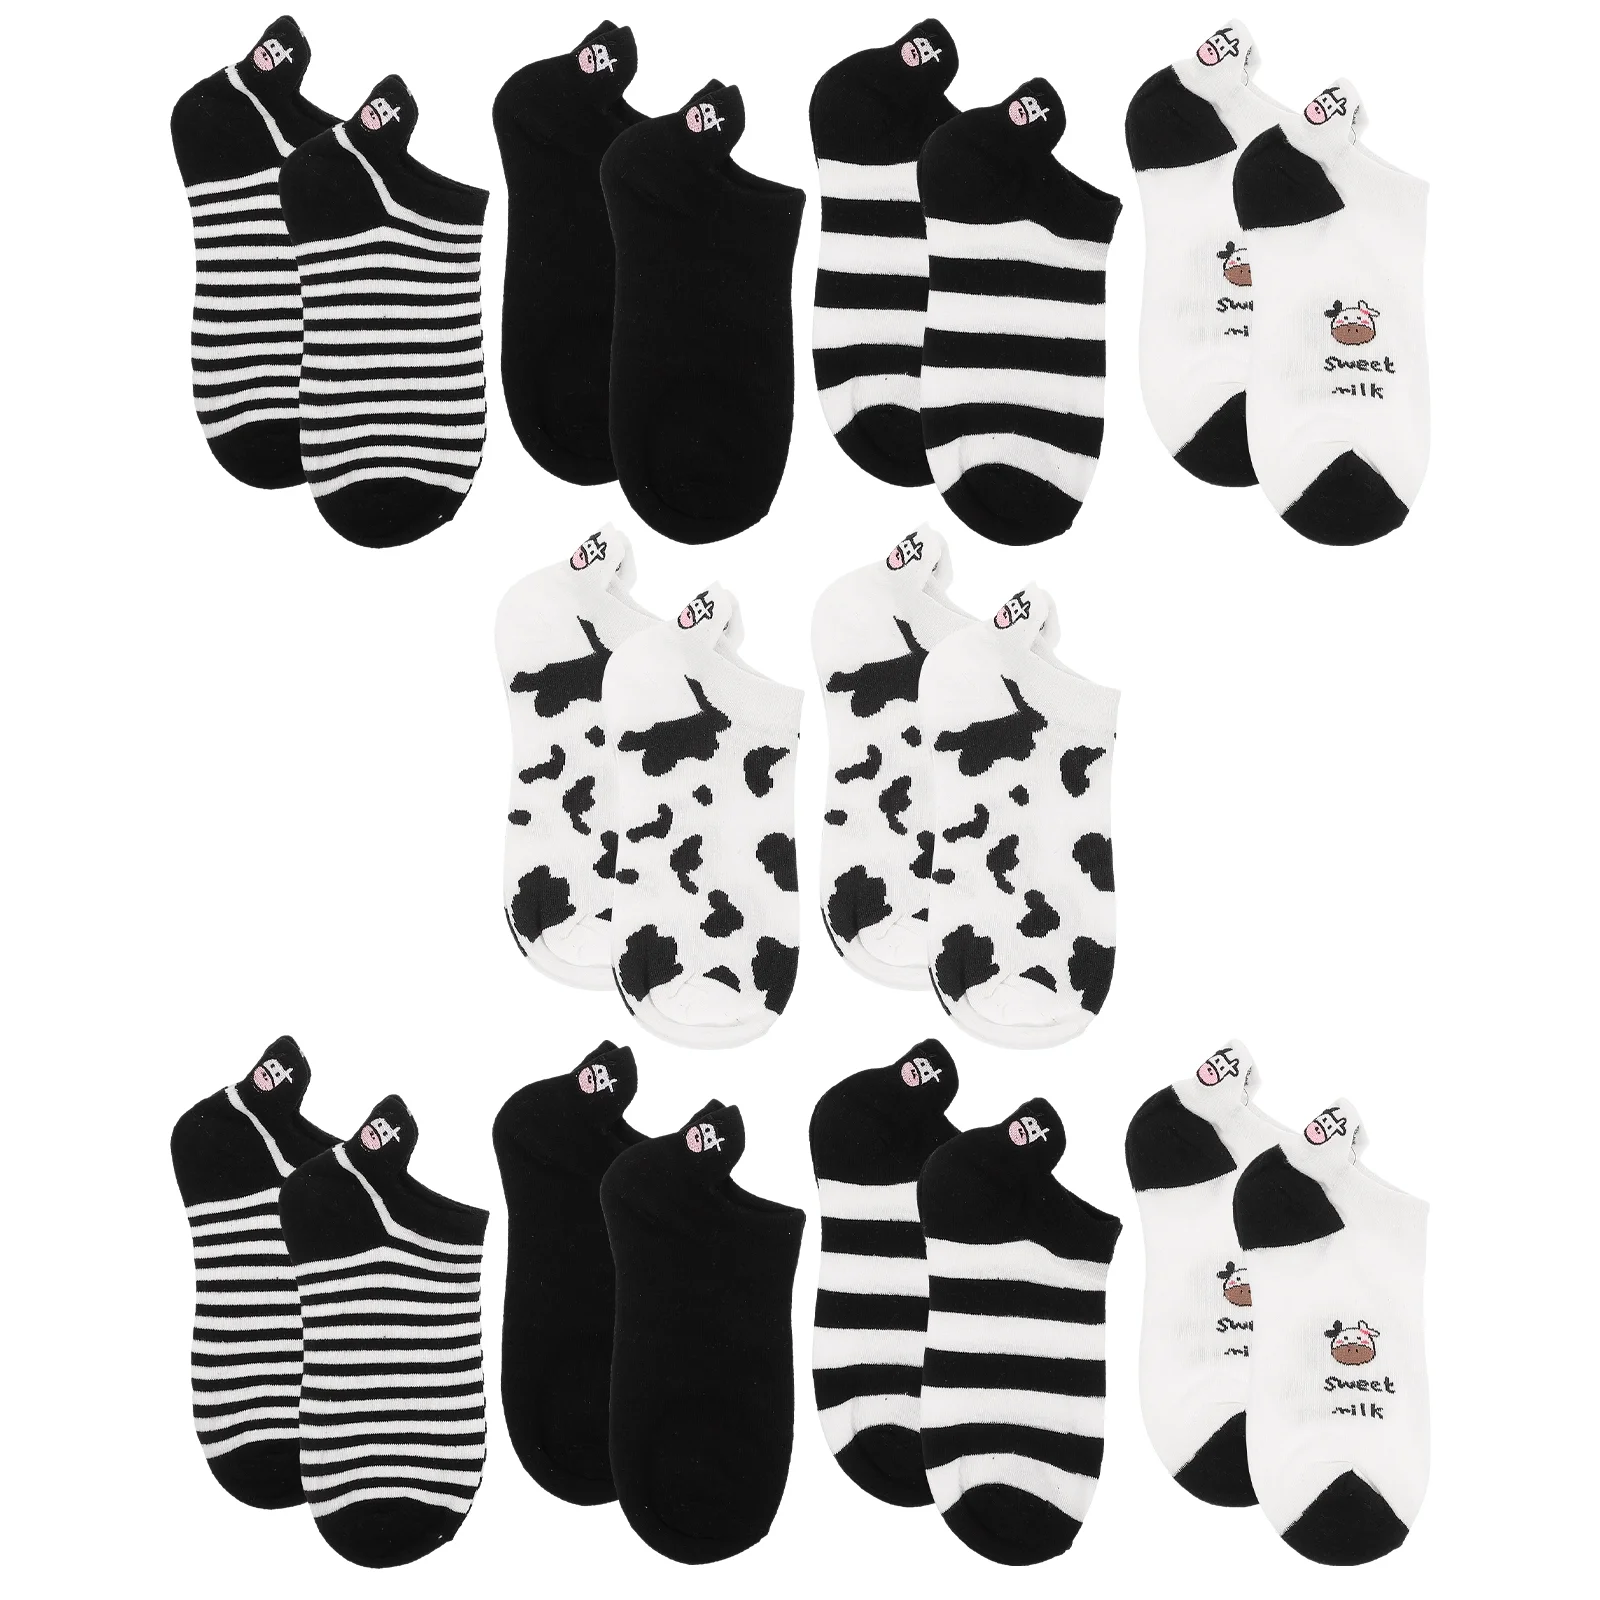 

Valiclud Cute Cartoon Socks - 5 Pairs of Comfortable Cotton Ankle Socks with Lovely Cow Pattern for Girls and Women